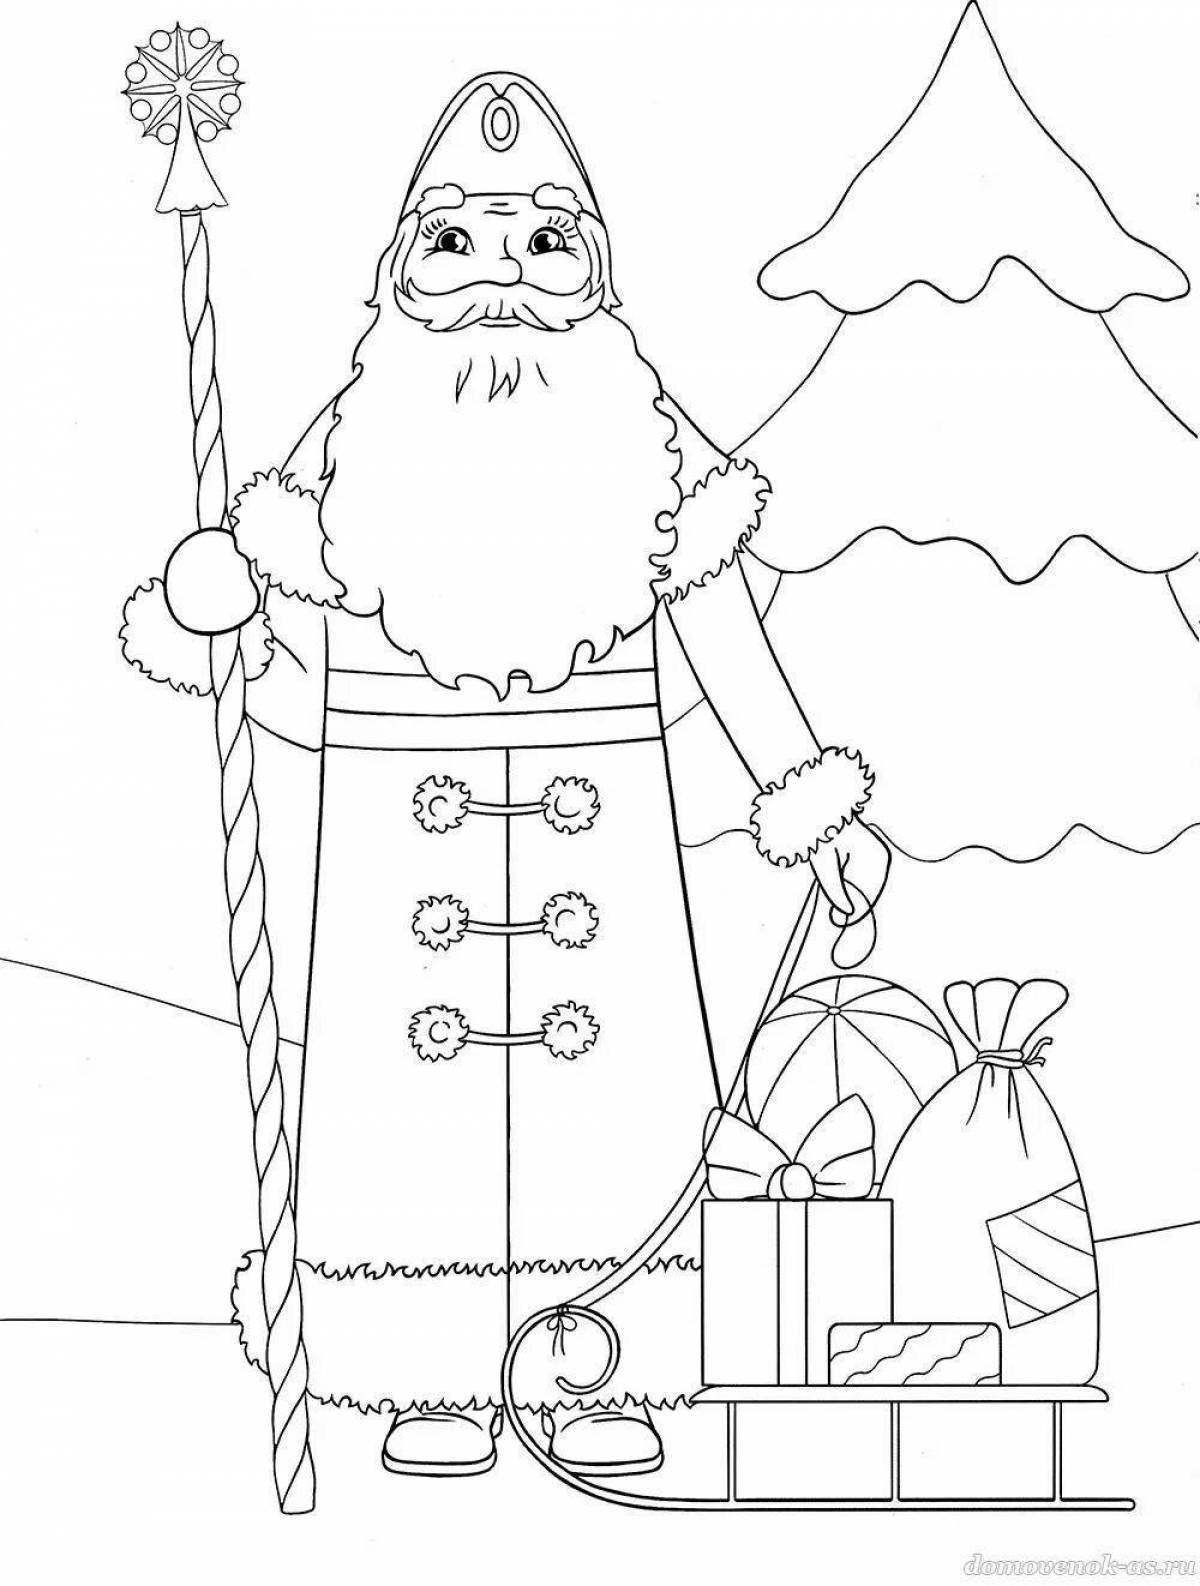 Glowing governor frost coloring page